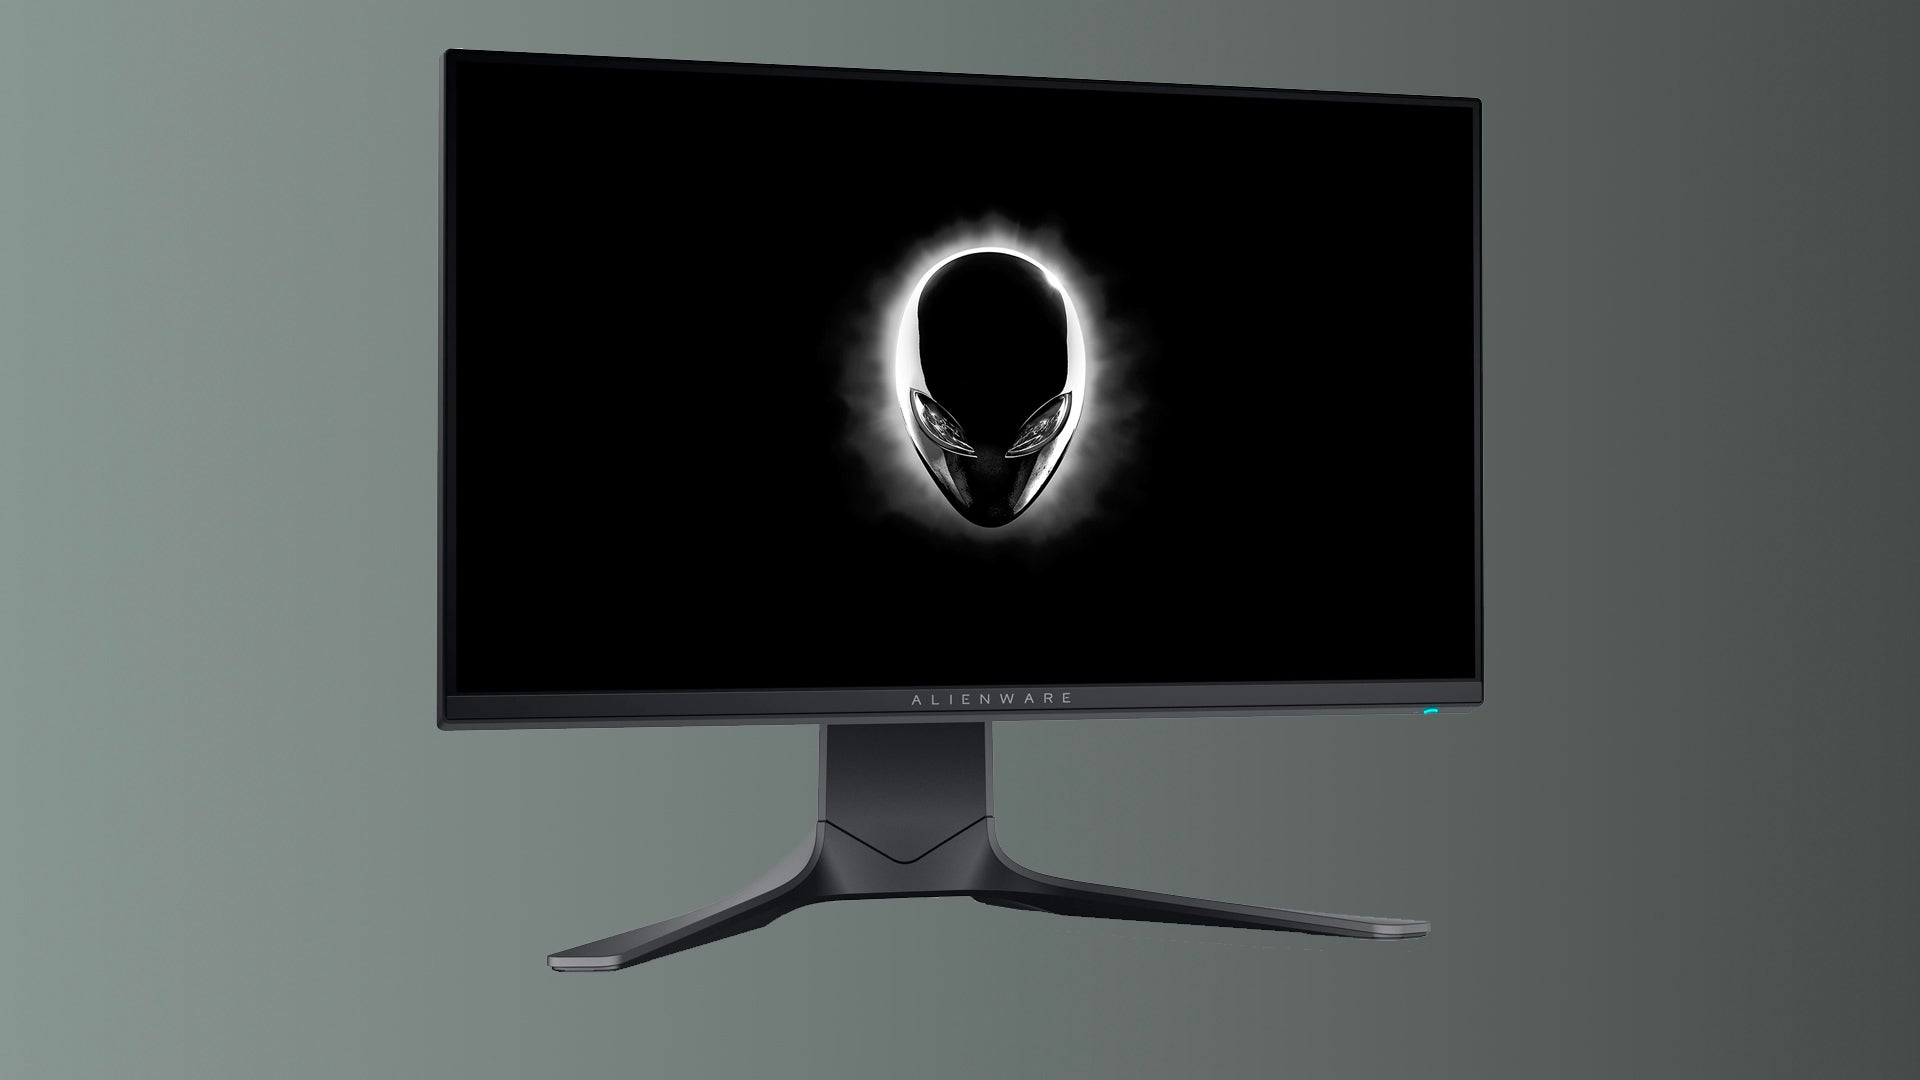 This 240Hz Dell Alienware monitor at £239 is the key to unlocking